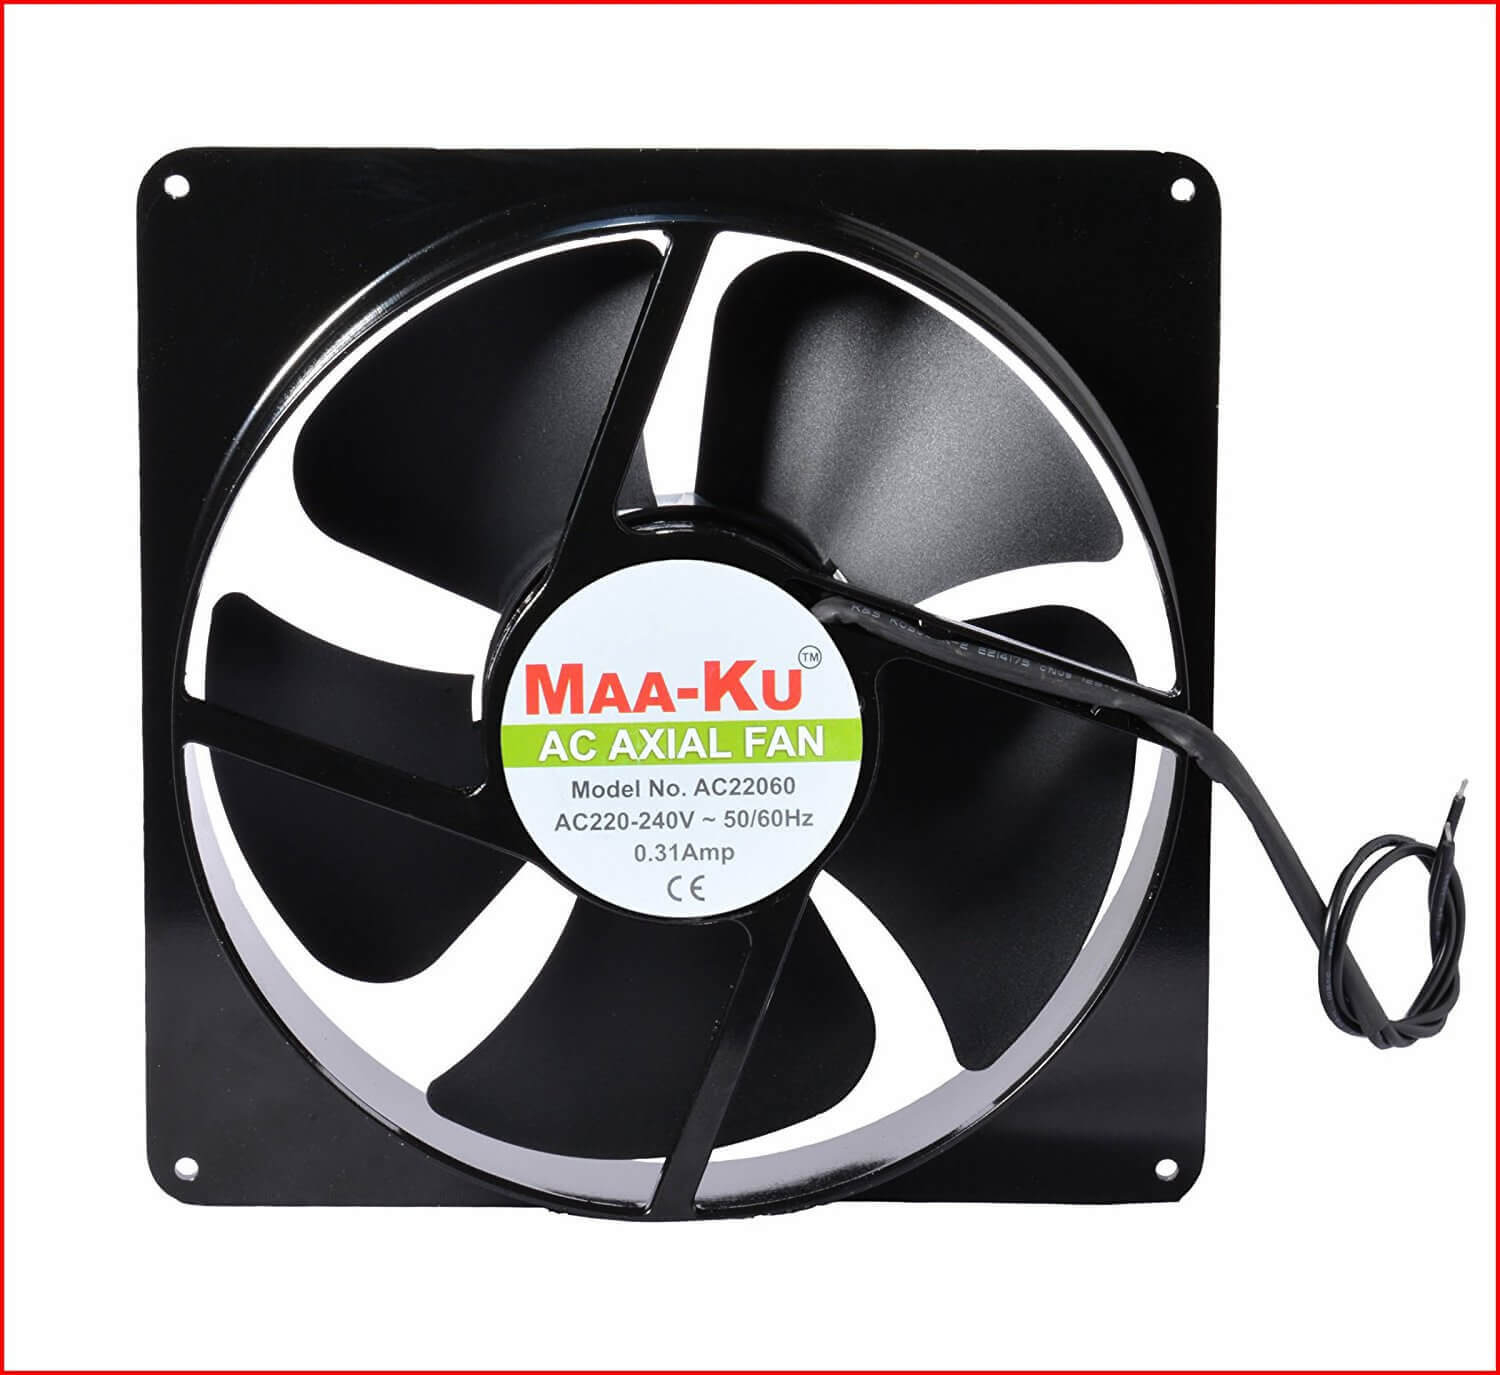 Best Exhaust Fan For Kitchen Bathroom In India in dimensions 1500 X 1375